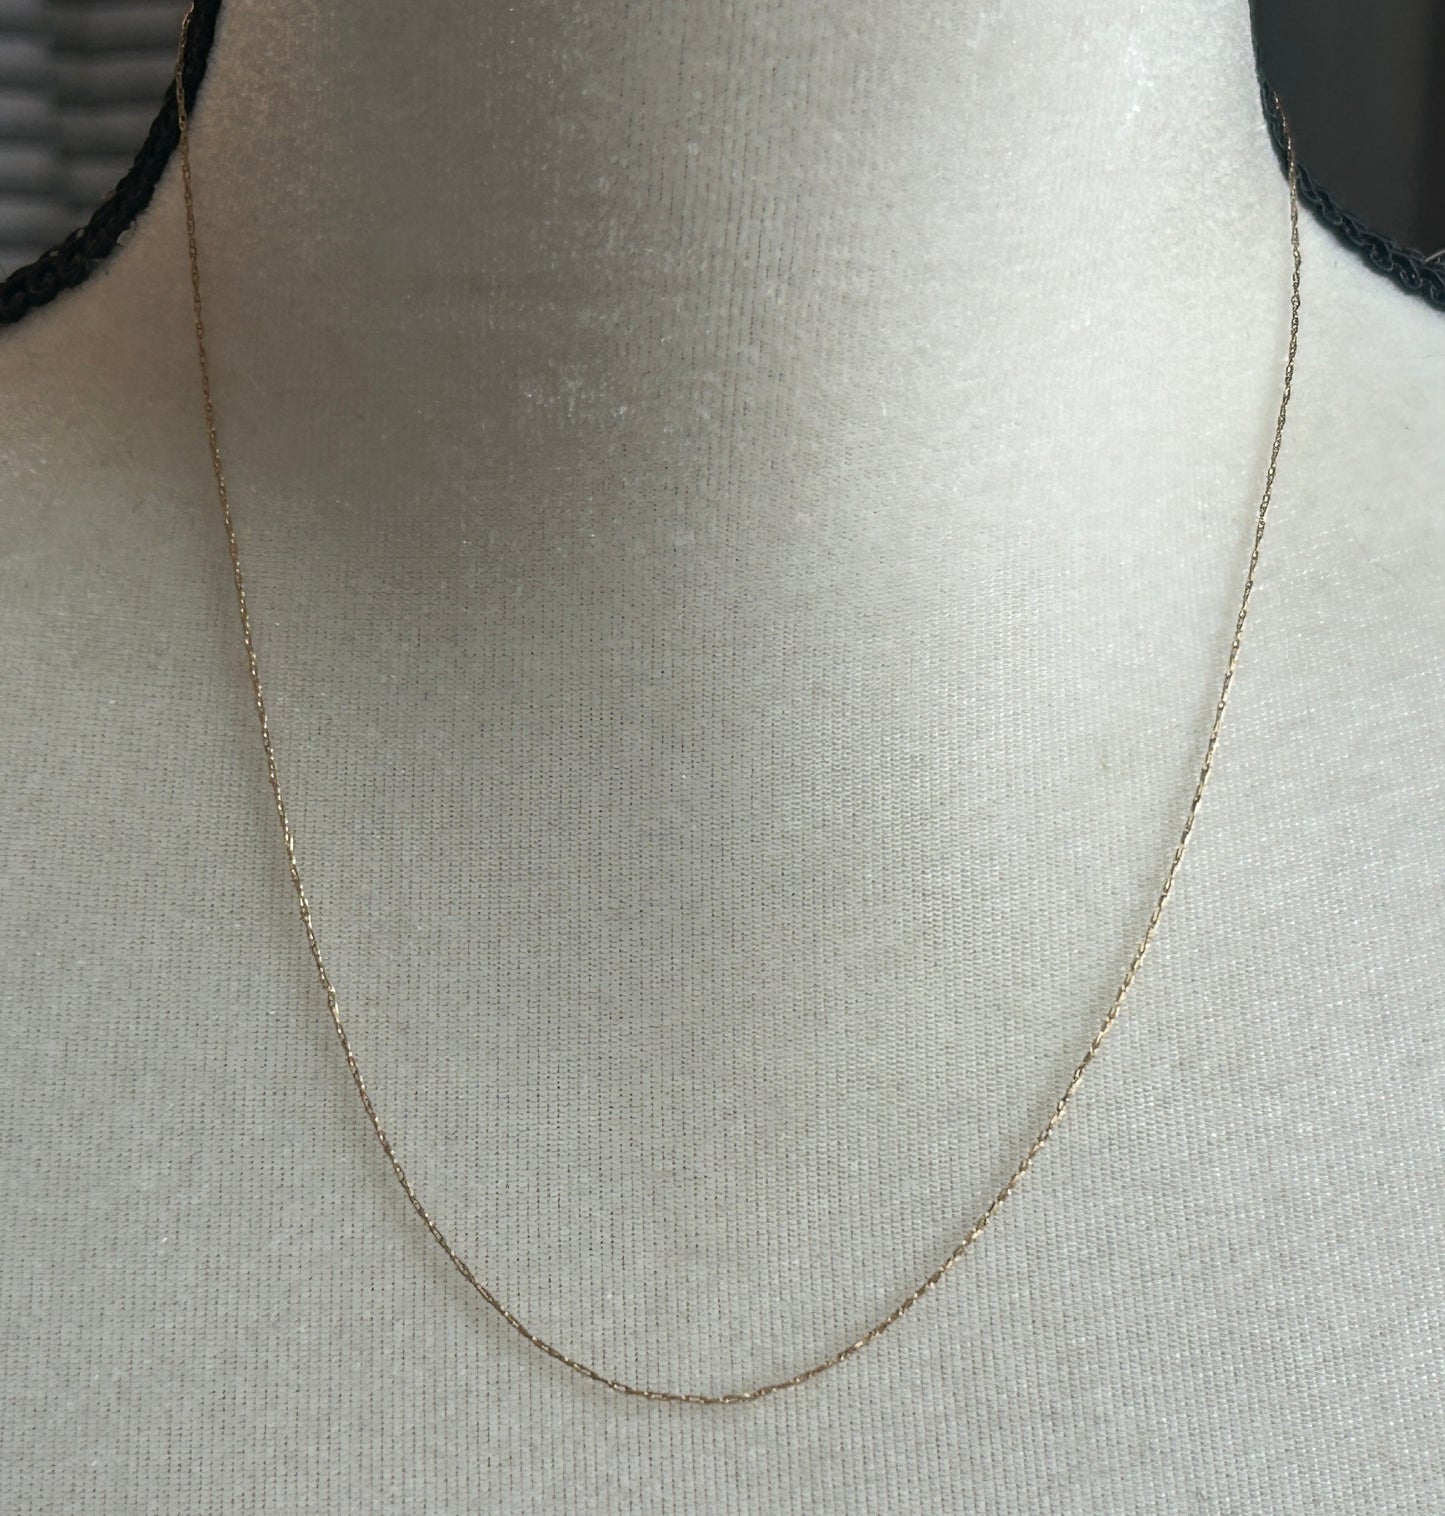 14k Yellow Gold Thin Chain Link Necklace 19" Long x 1mm Wide